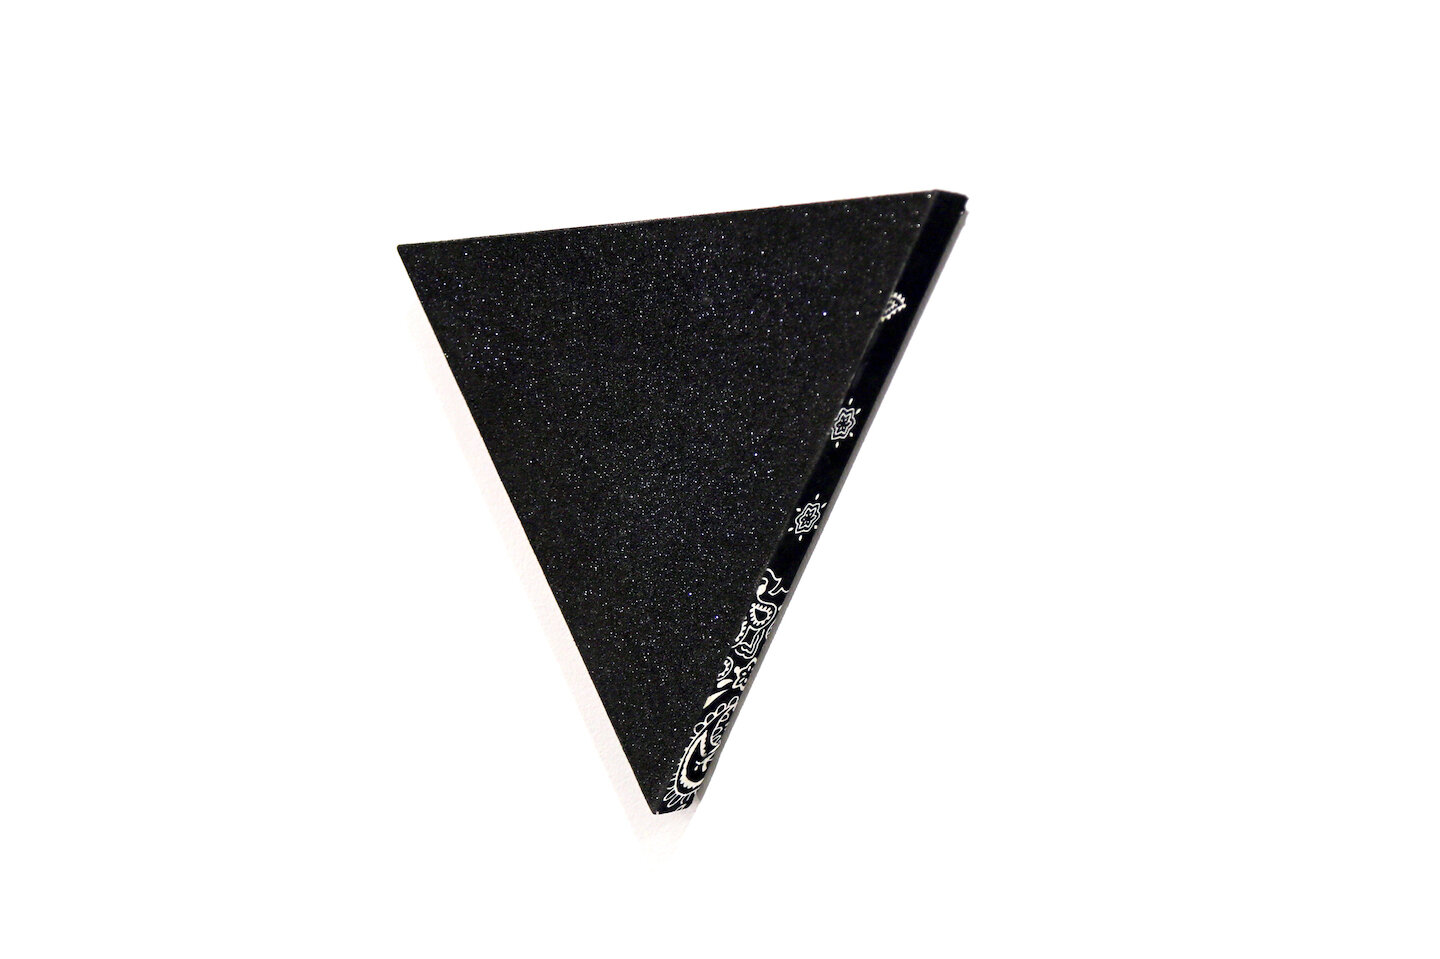   Black Triangle (Tie Me Up)  Sand and glitter on black hanky 2018 